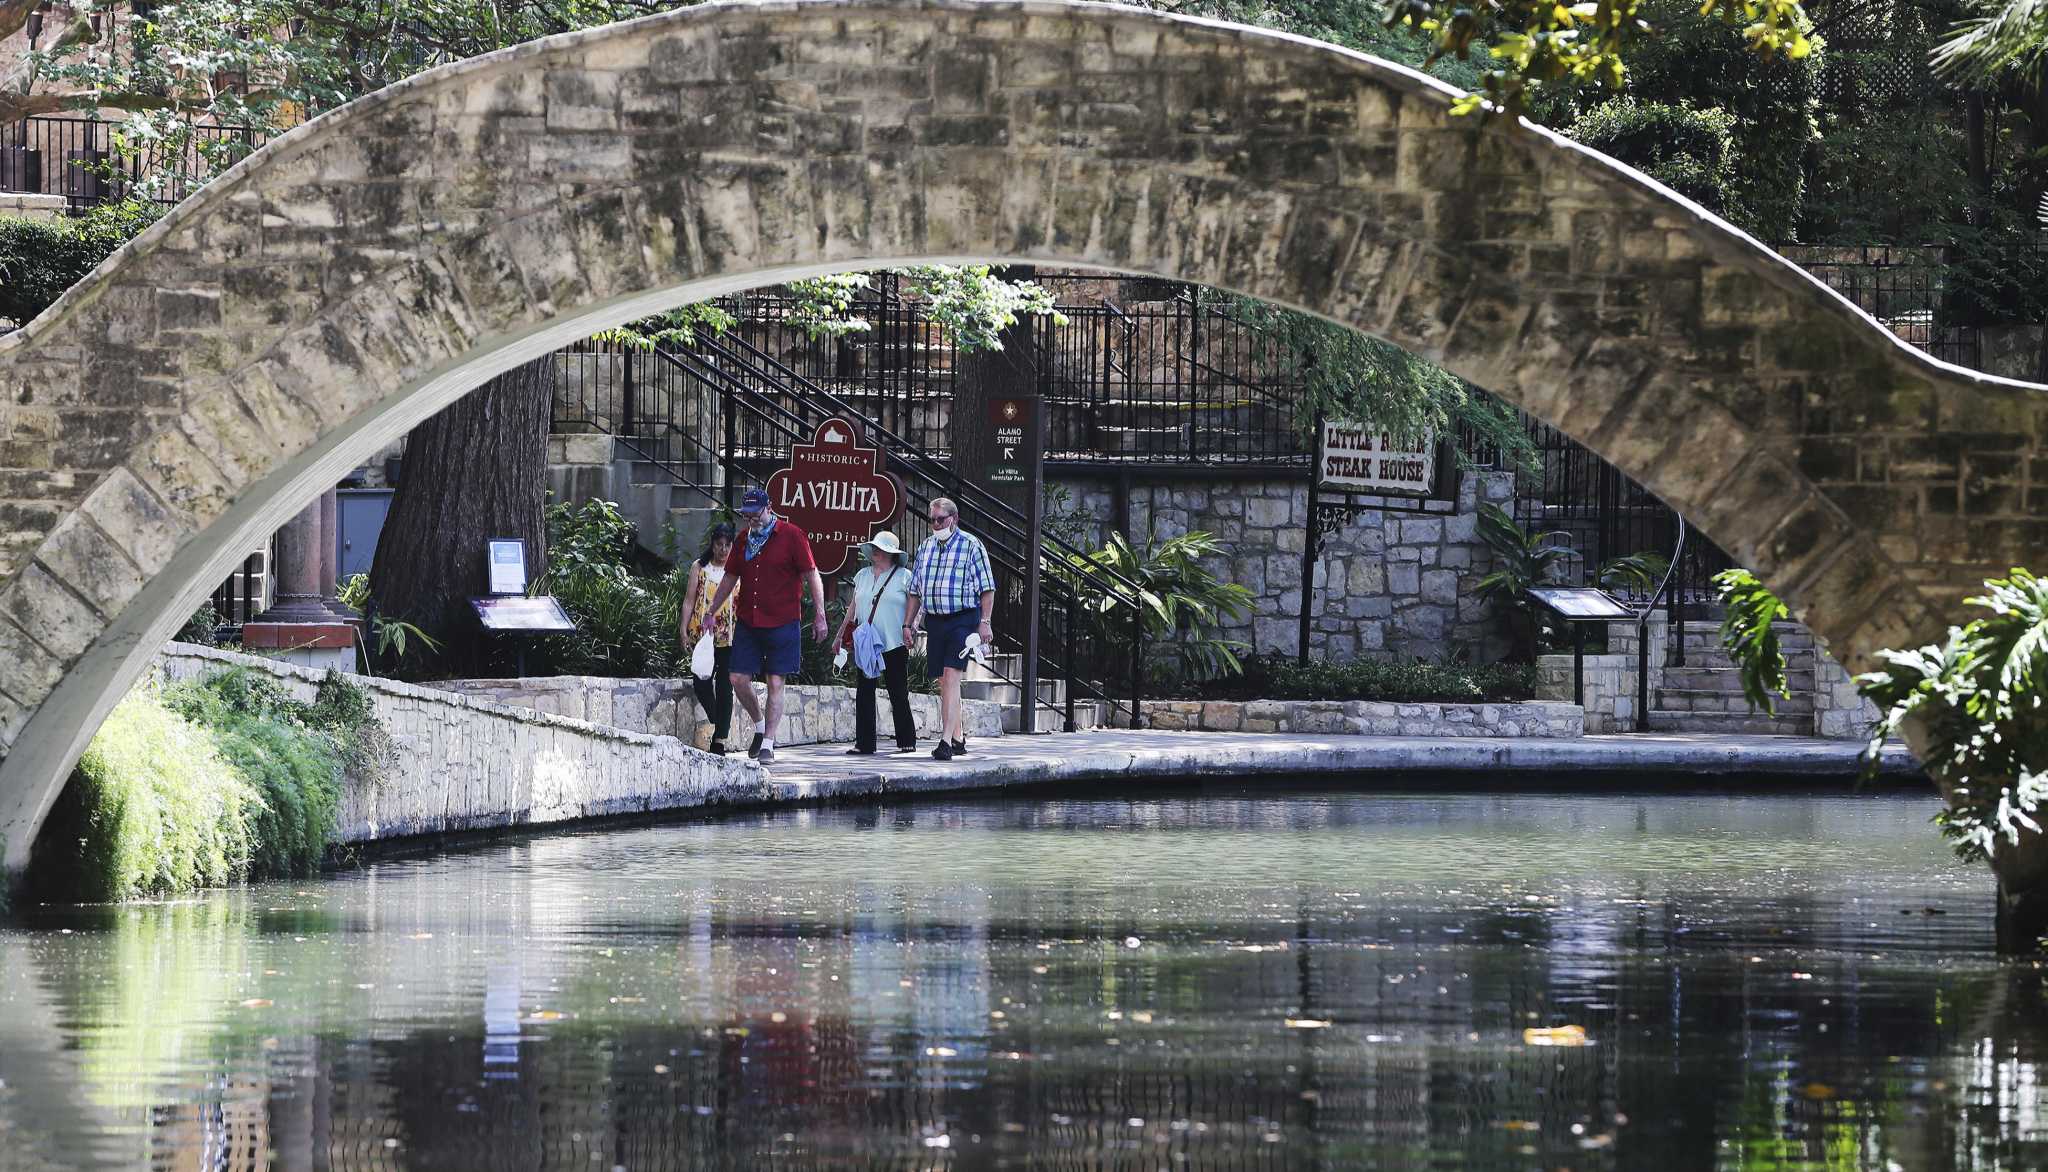 San Antonio River Walk not the nation's best, according to USA Today